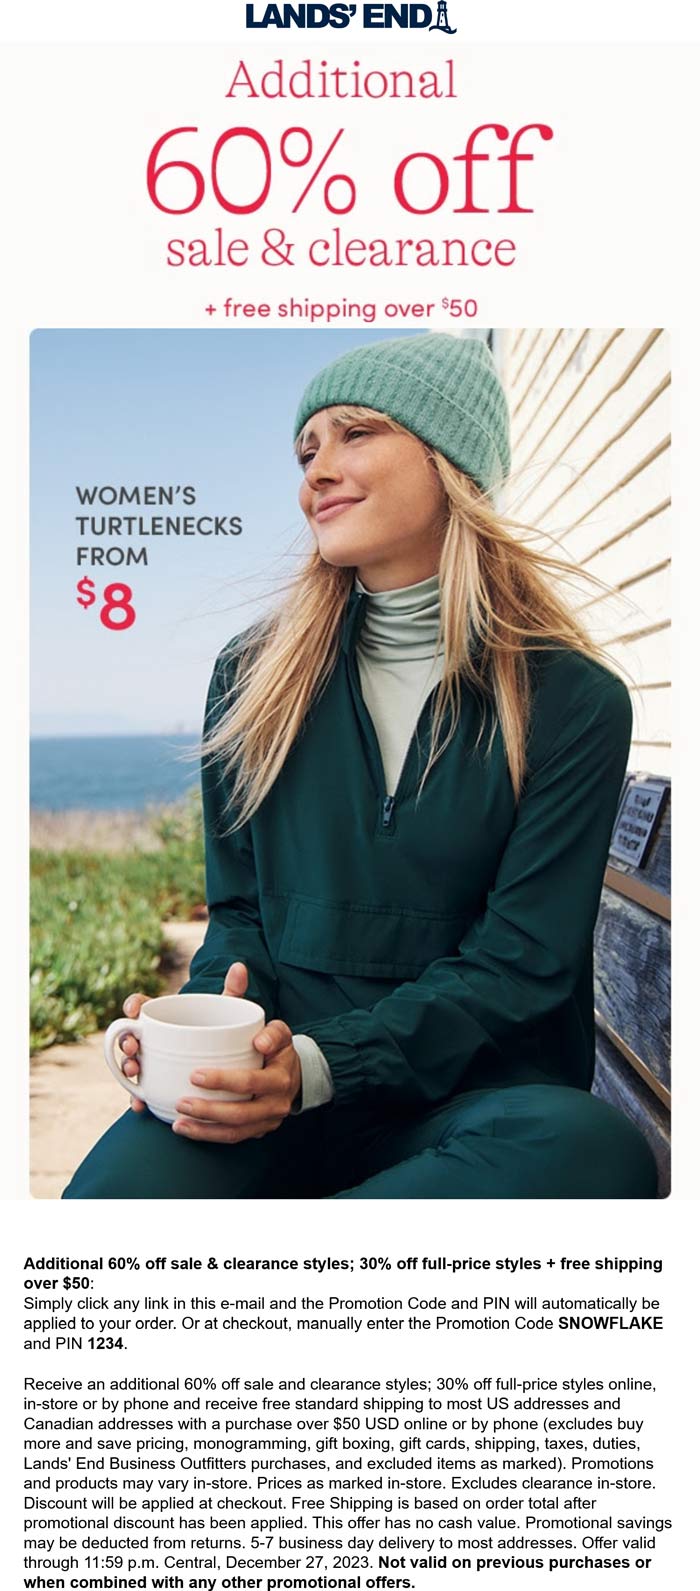 Lands End stores Coupon  $8 turtlenecks + extra 60% off sale & clearance items today at Lands End via promo code SNOWFLAKE and pin 1234 #landsend 